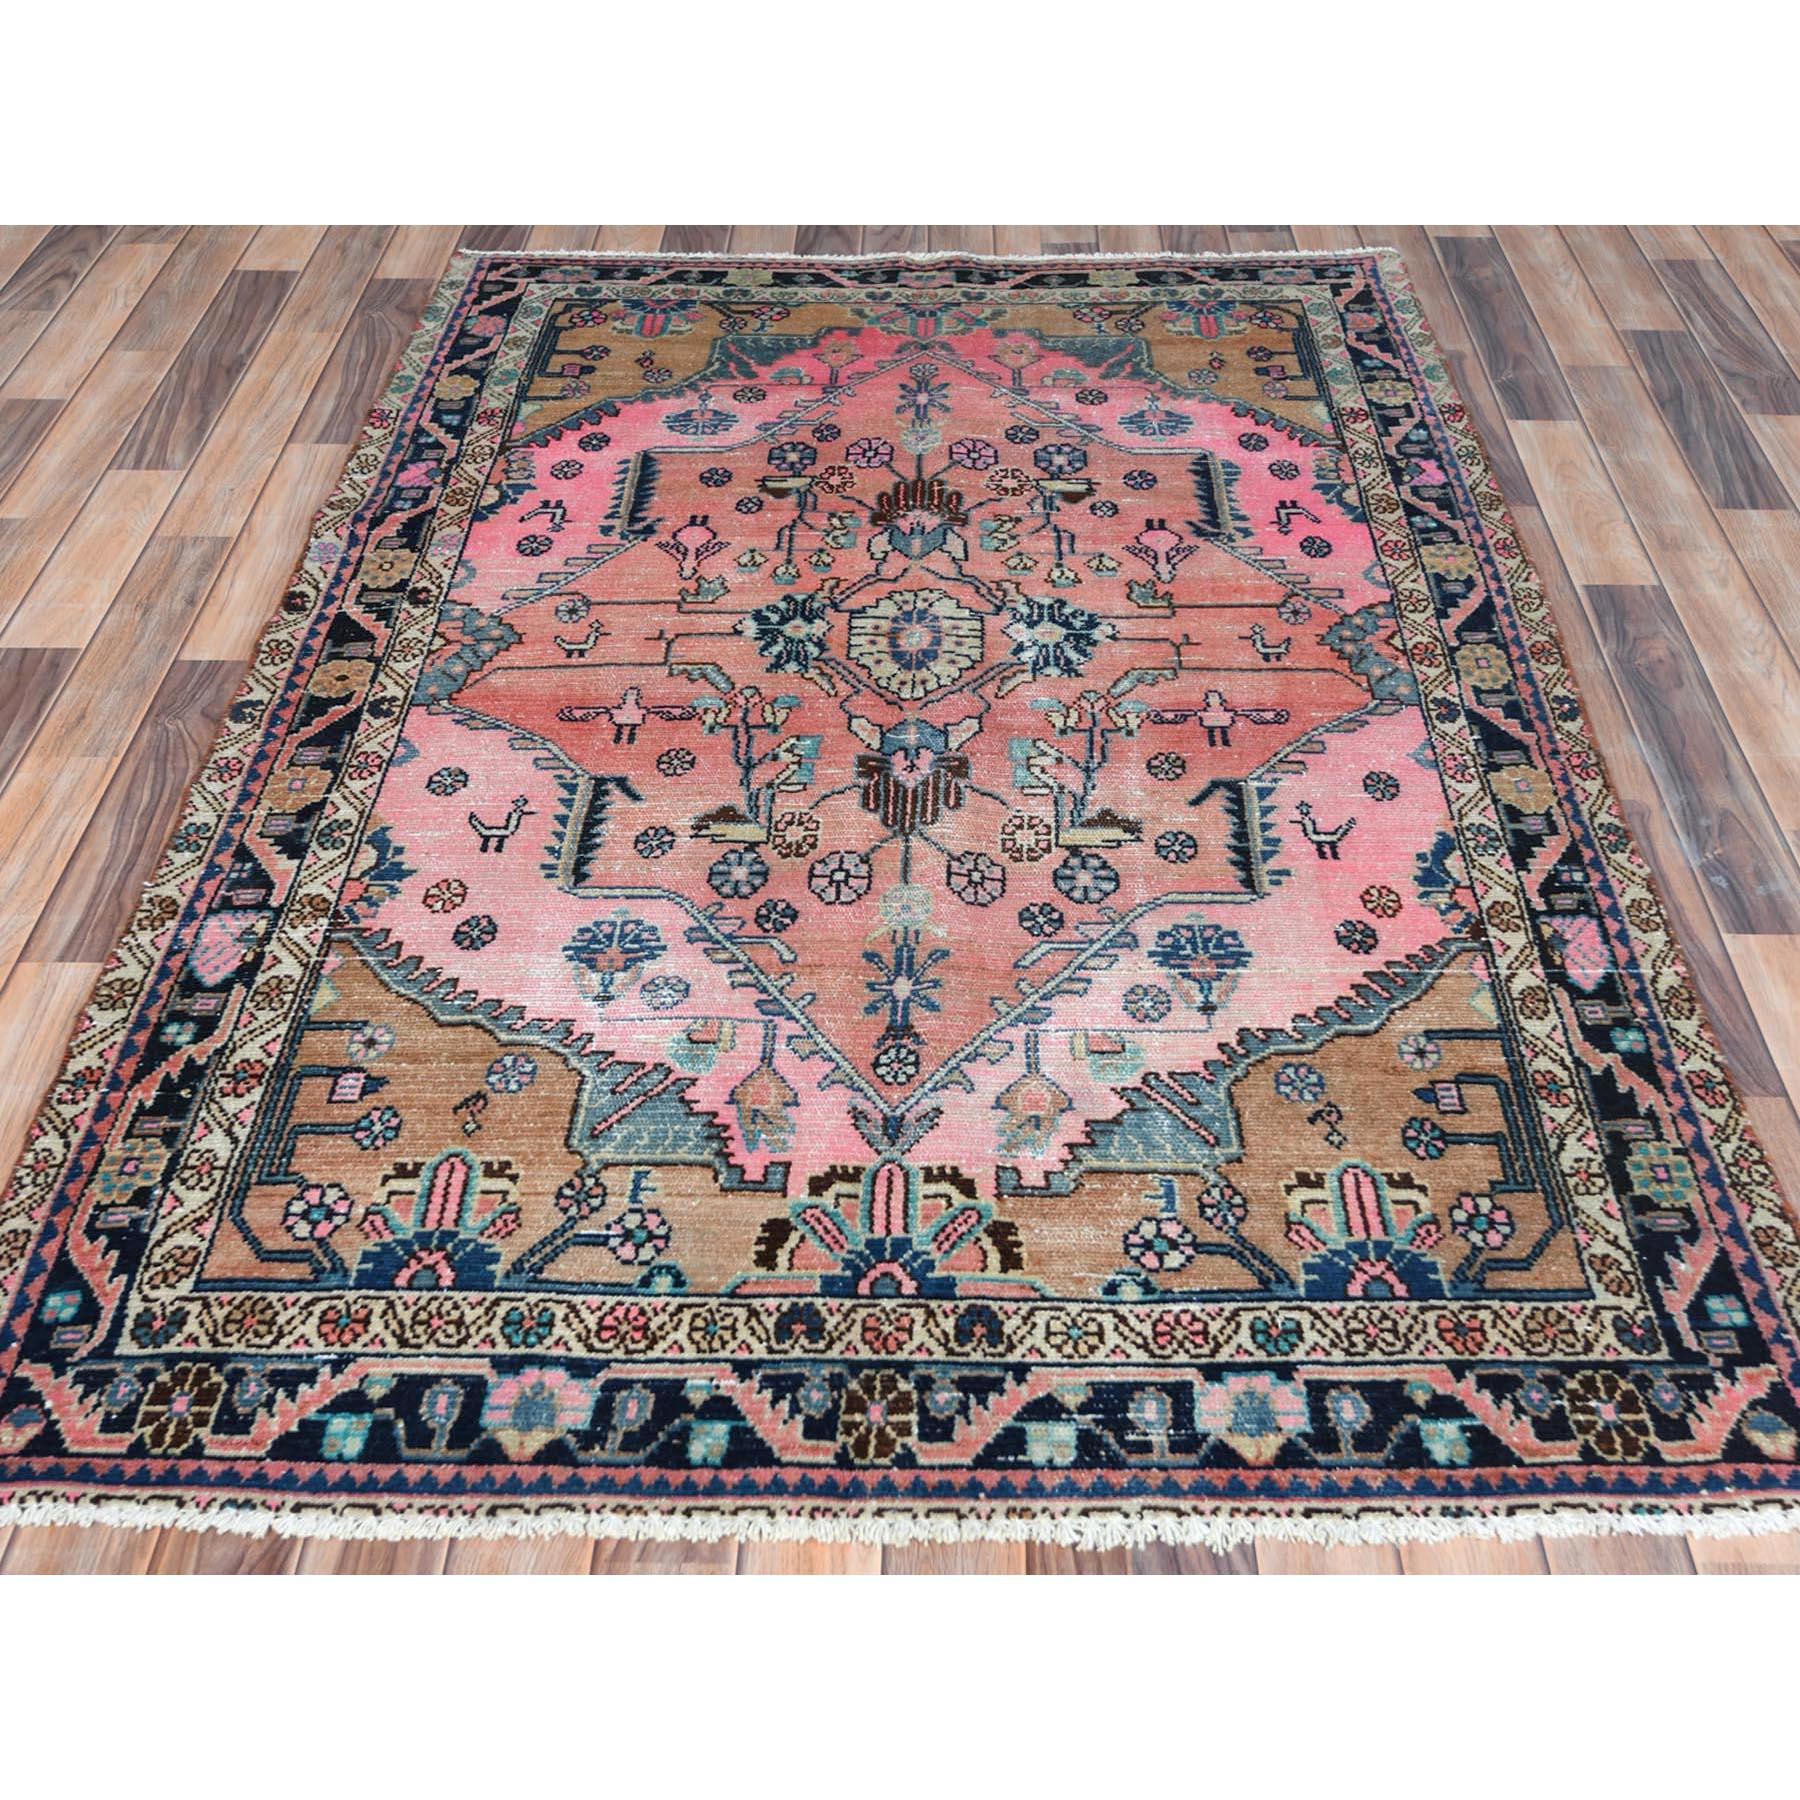 This fabulous hand-knotted carpet has been created and designed for extra strength and durability. This rug has been handcrafted for weeks in the traditional method that is used to make
Exact Rug Size in Feet and Inches : 4'7